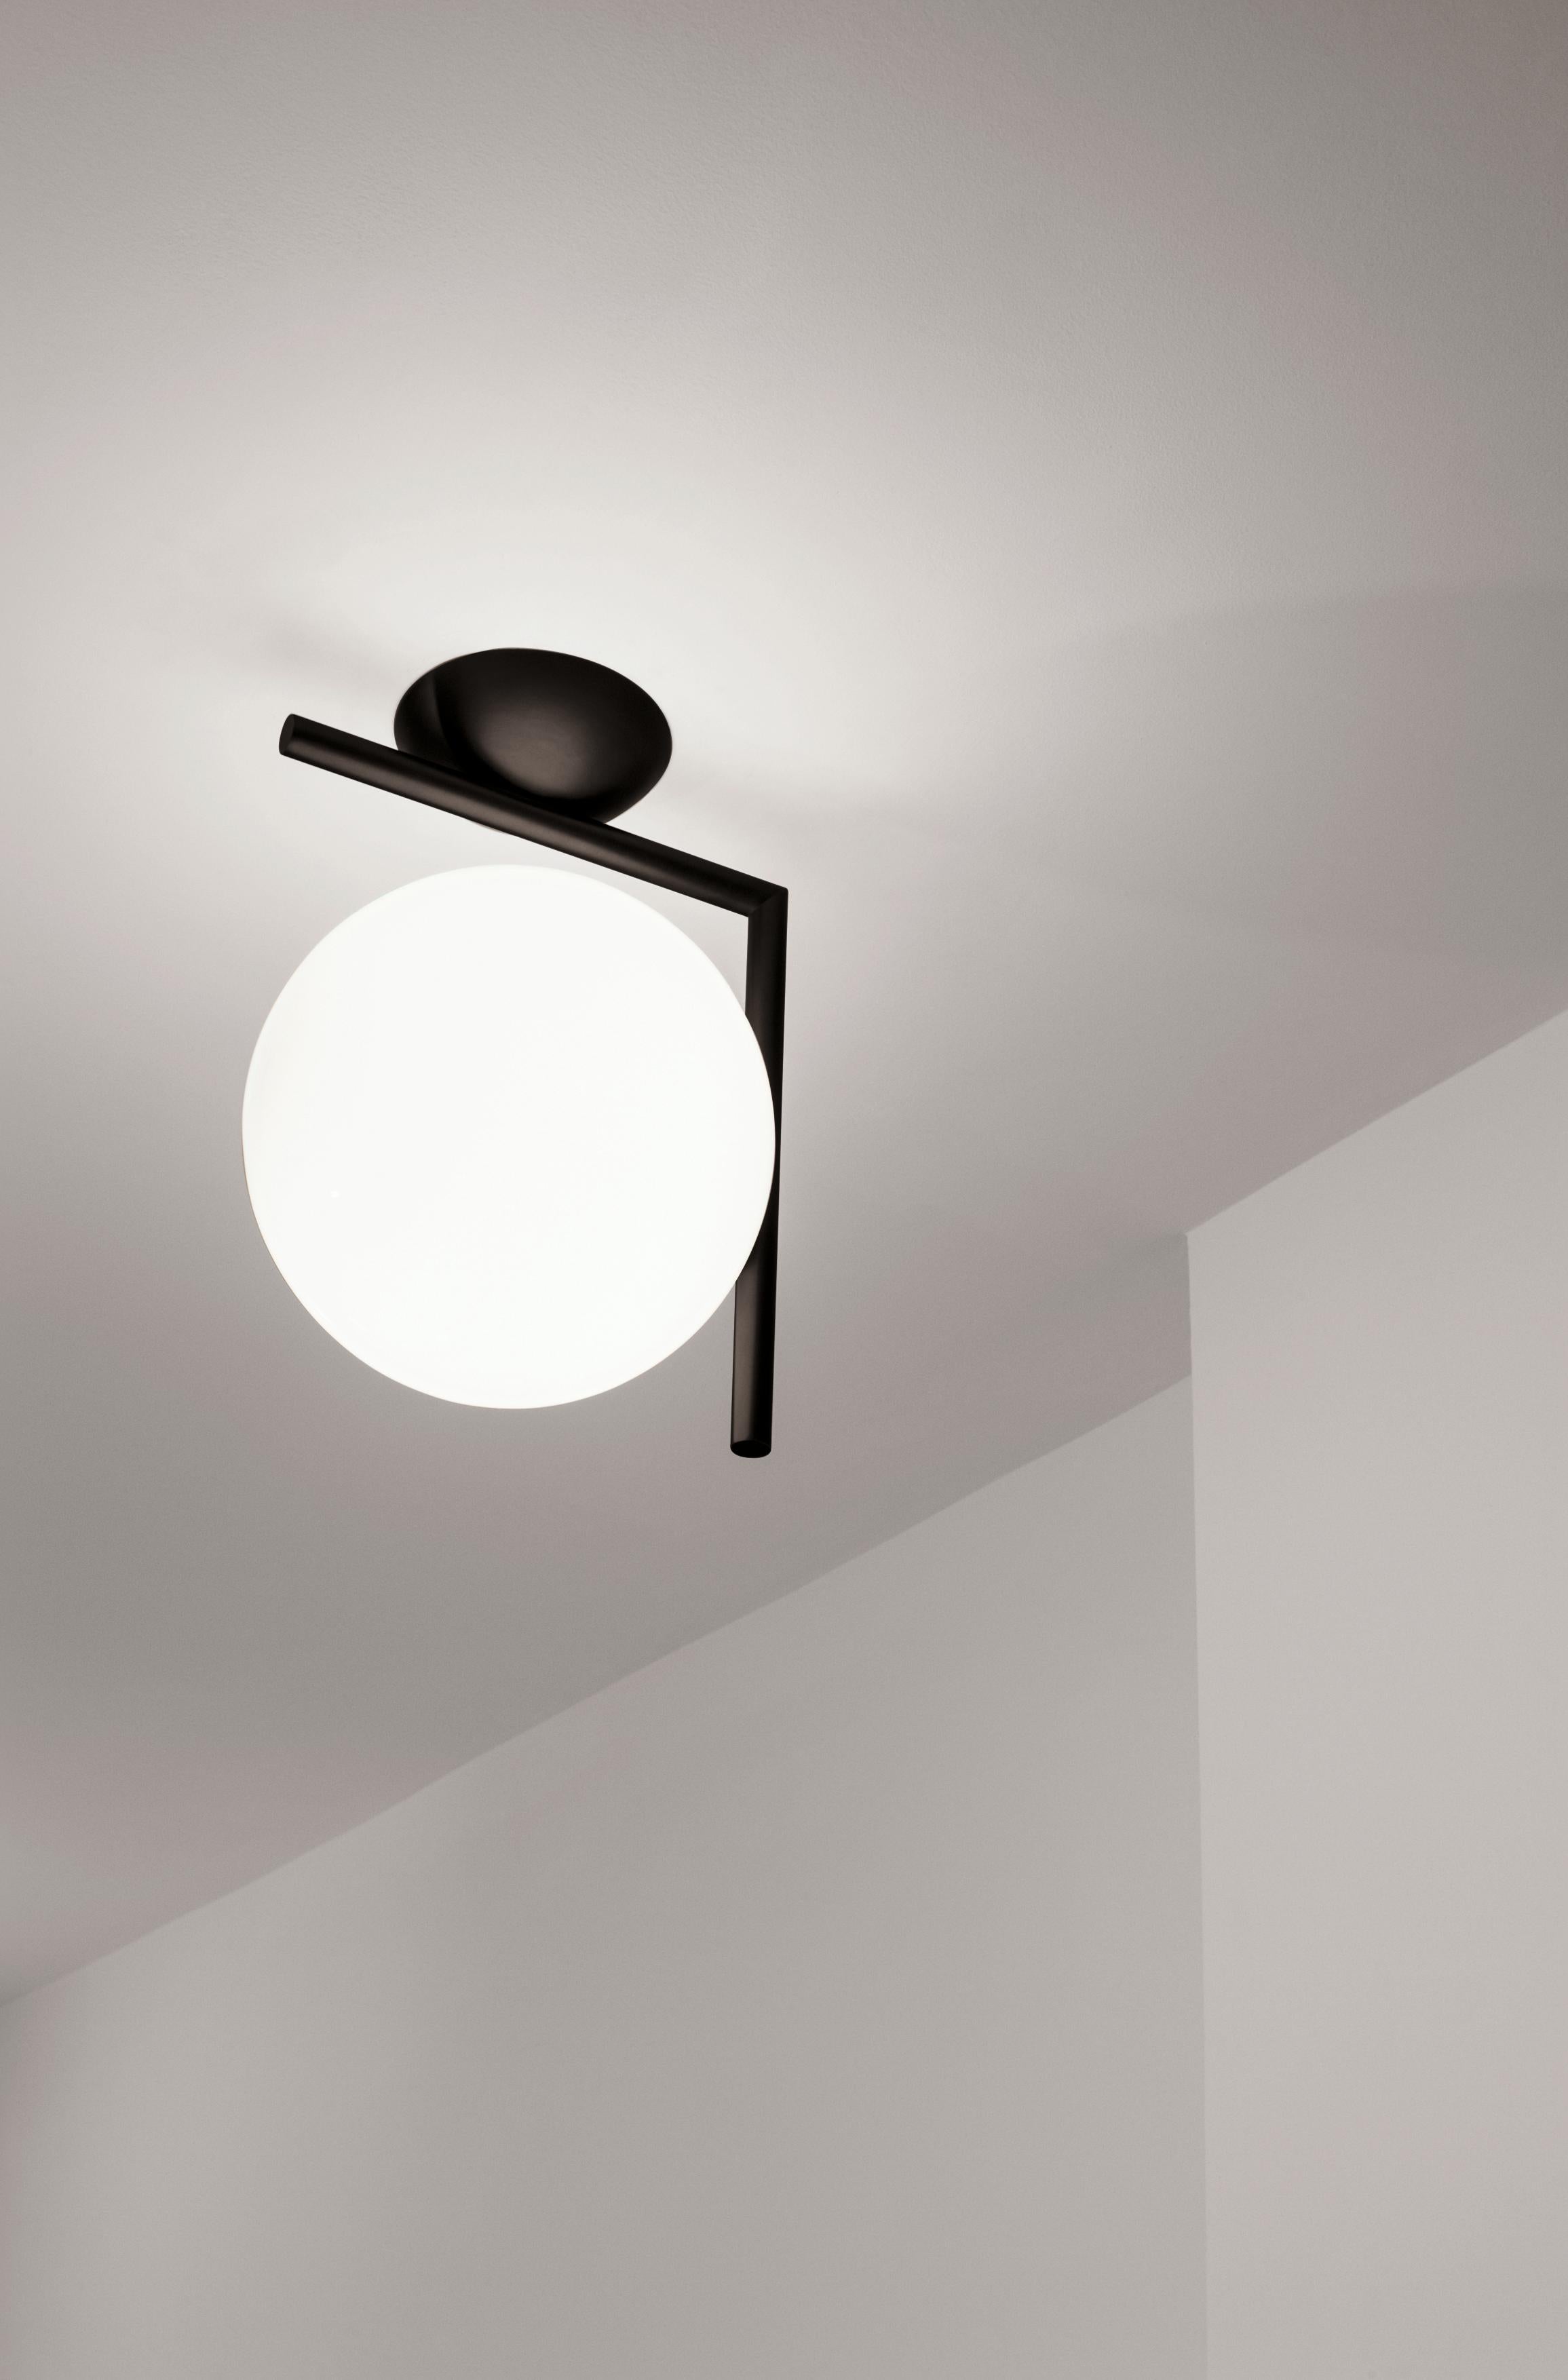 FLOS IC 2 Ceiling and Wall Light in Black by Michael Anastassiades

Radiant light, delicate balance: Like the other pieces in his IC Light Series, the IC C/W lamp showcases designer Michael Anastassiades’ love of industrial simplicity as well as his